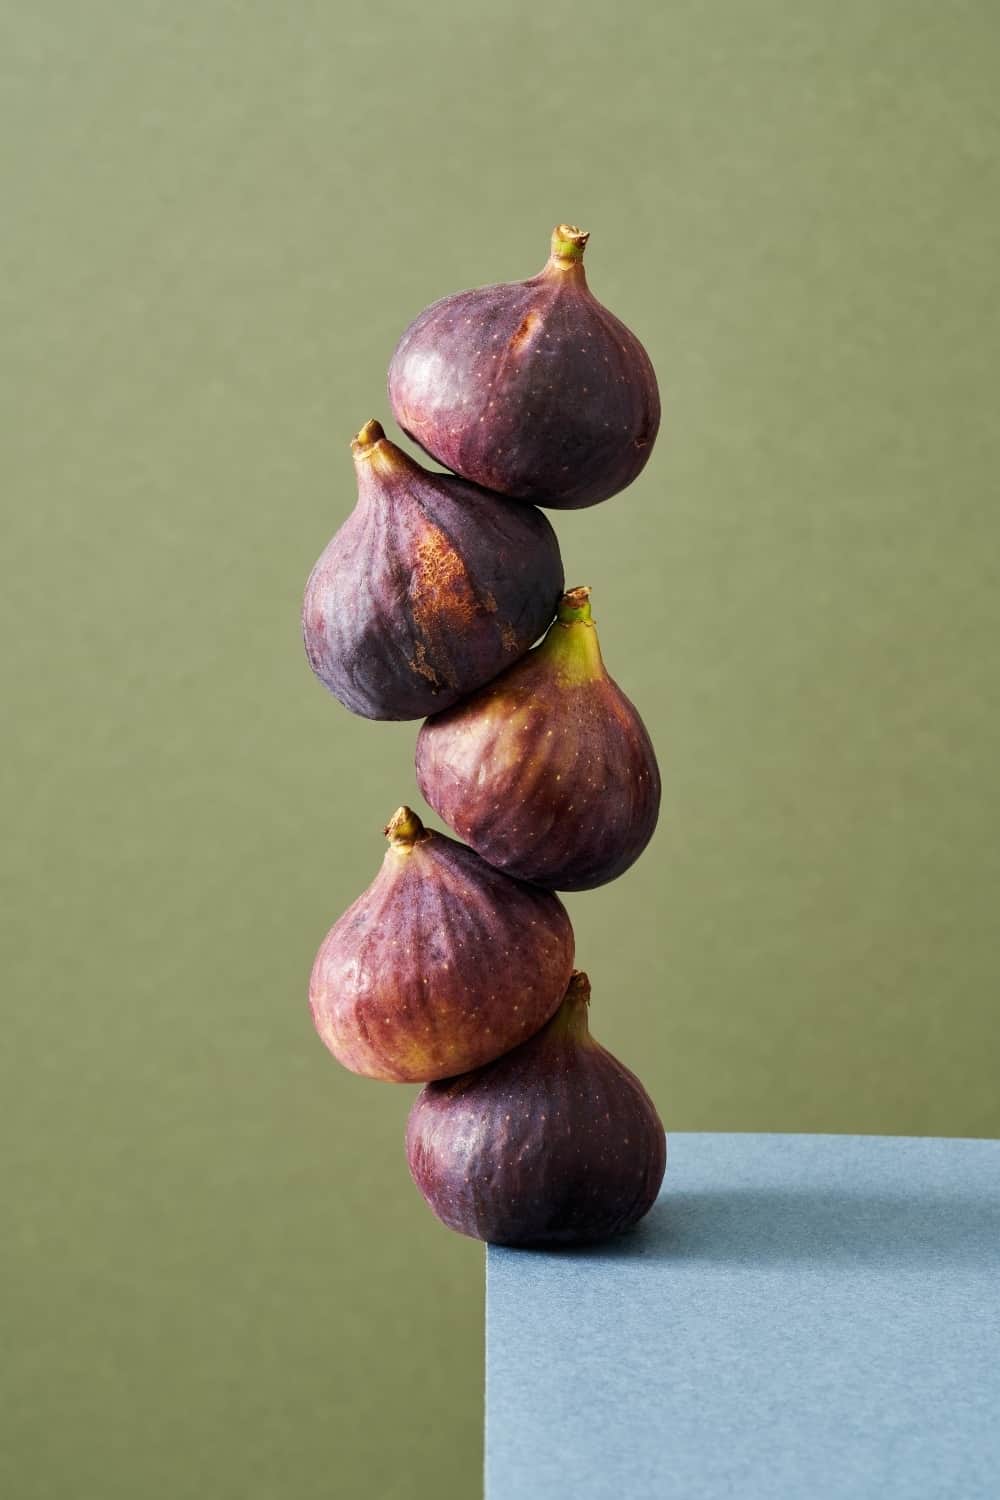 Fresh figs balancing on the edge of a table, with green background